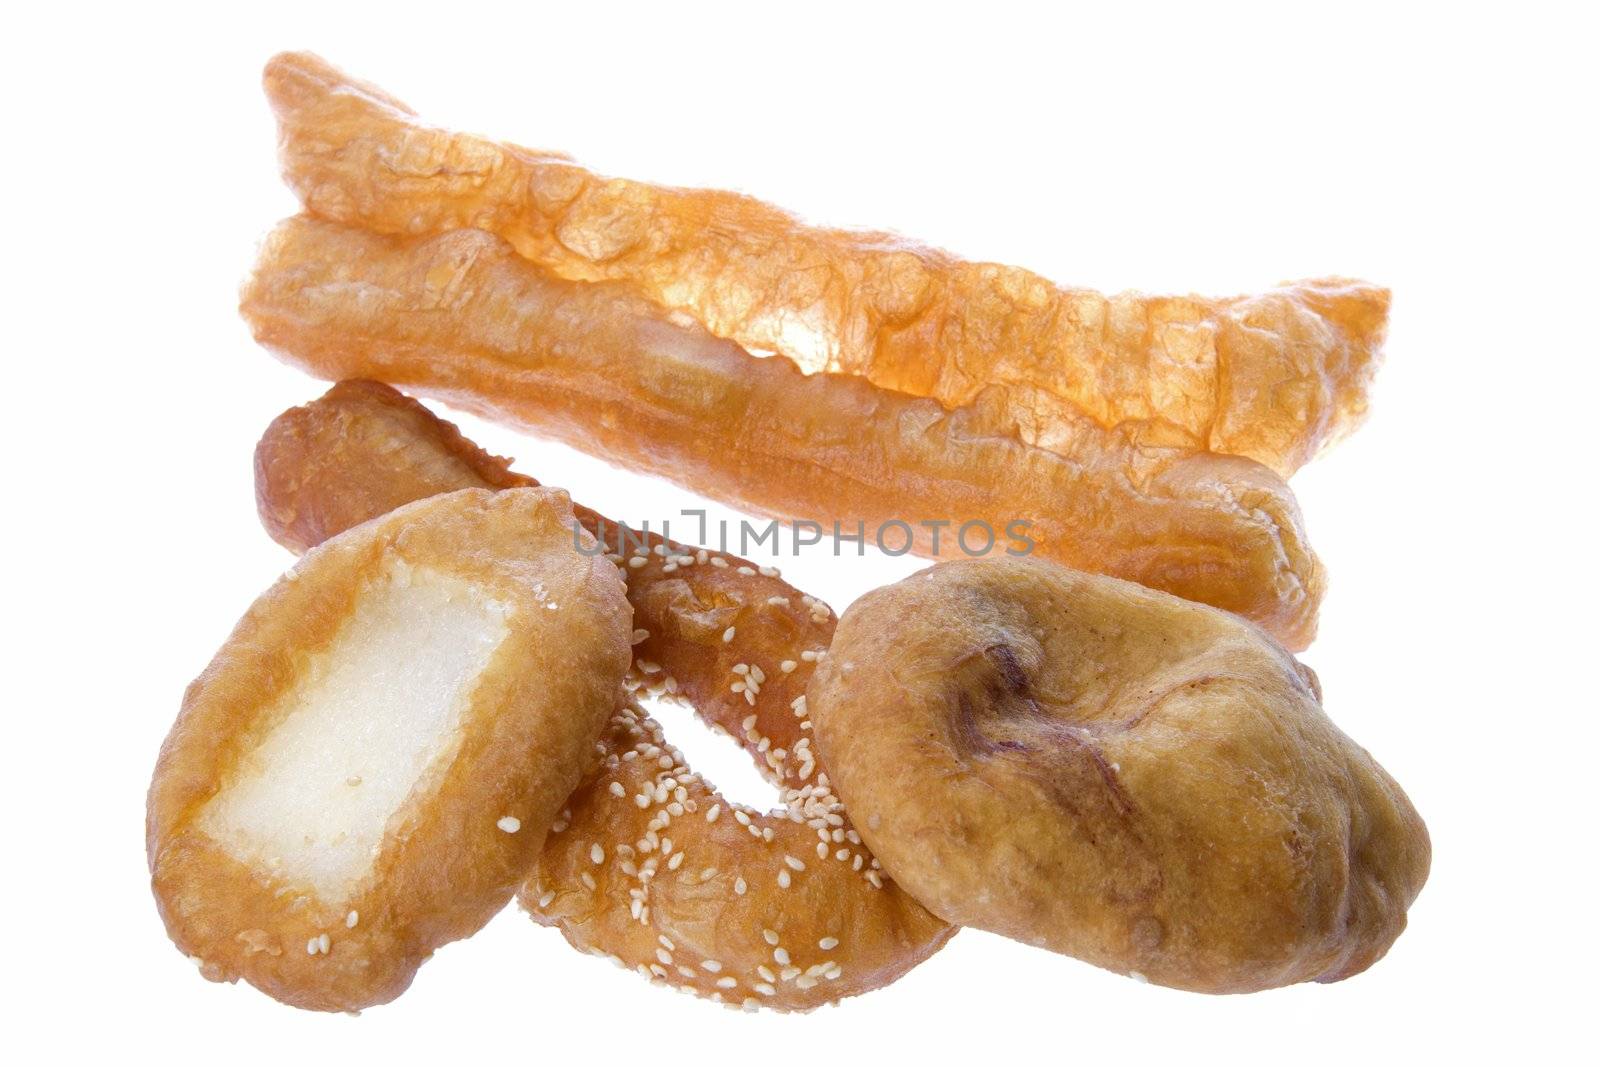 Isolated image of Malaysian fried pastries, usually eaten in the morning for breakfast.